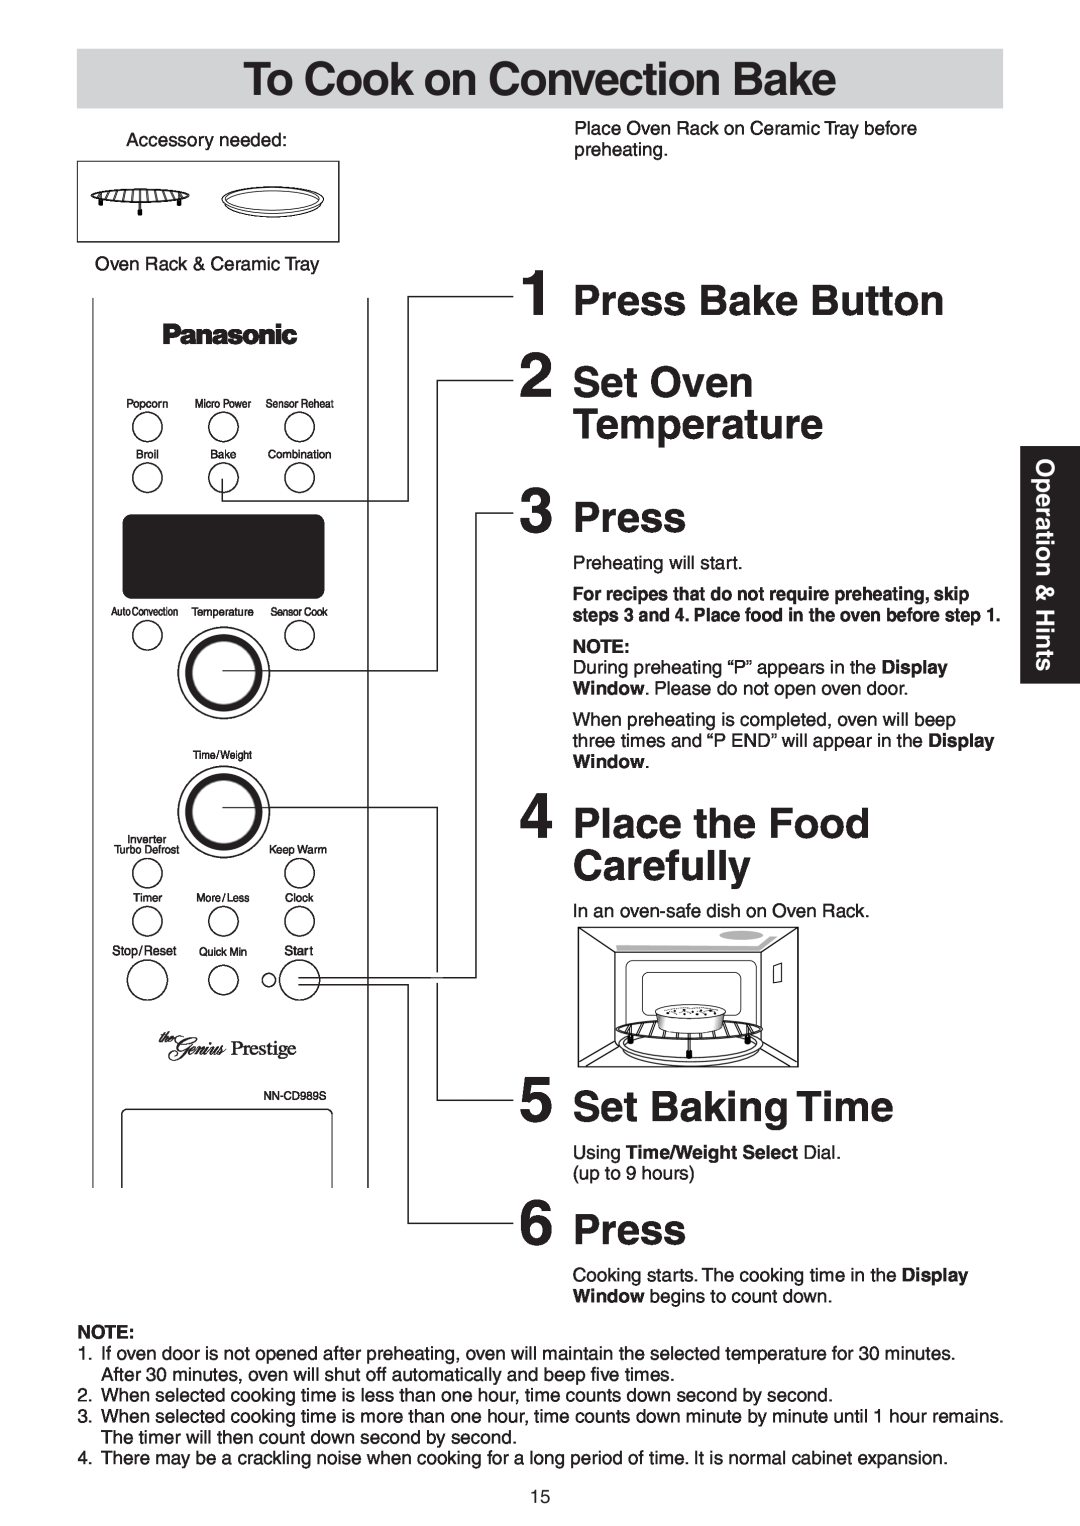 Panasonic NN-CD989S To Cook on Convection Bake, Press Bake Button 2Set Oven Temperature 3 Press, Place the Food Carefully 